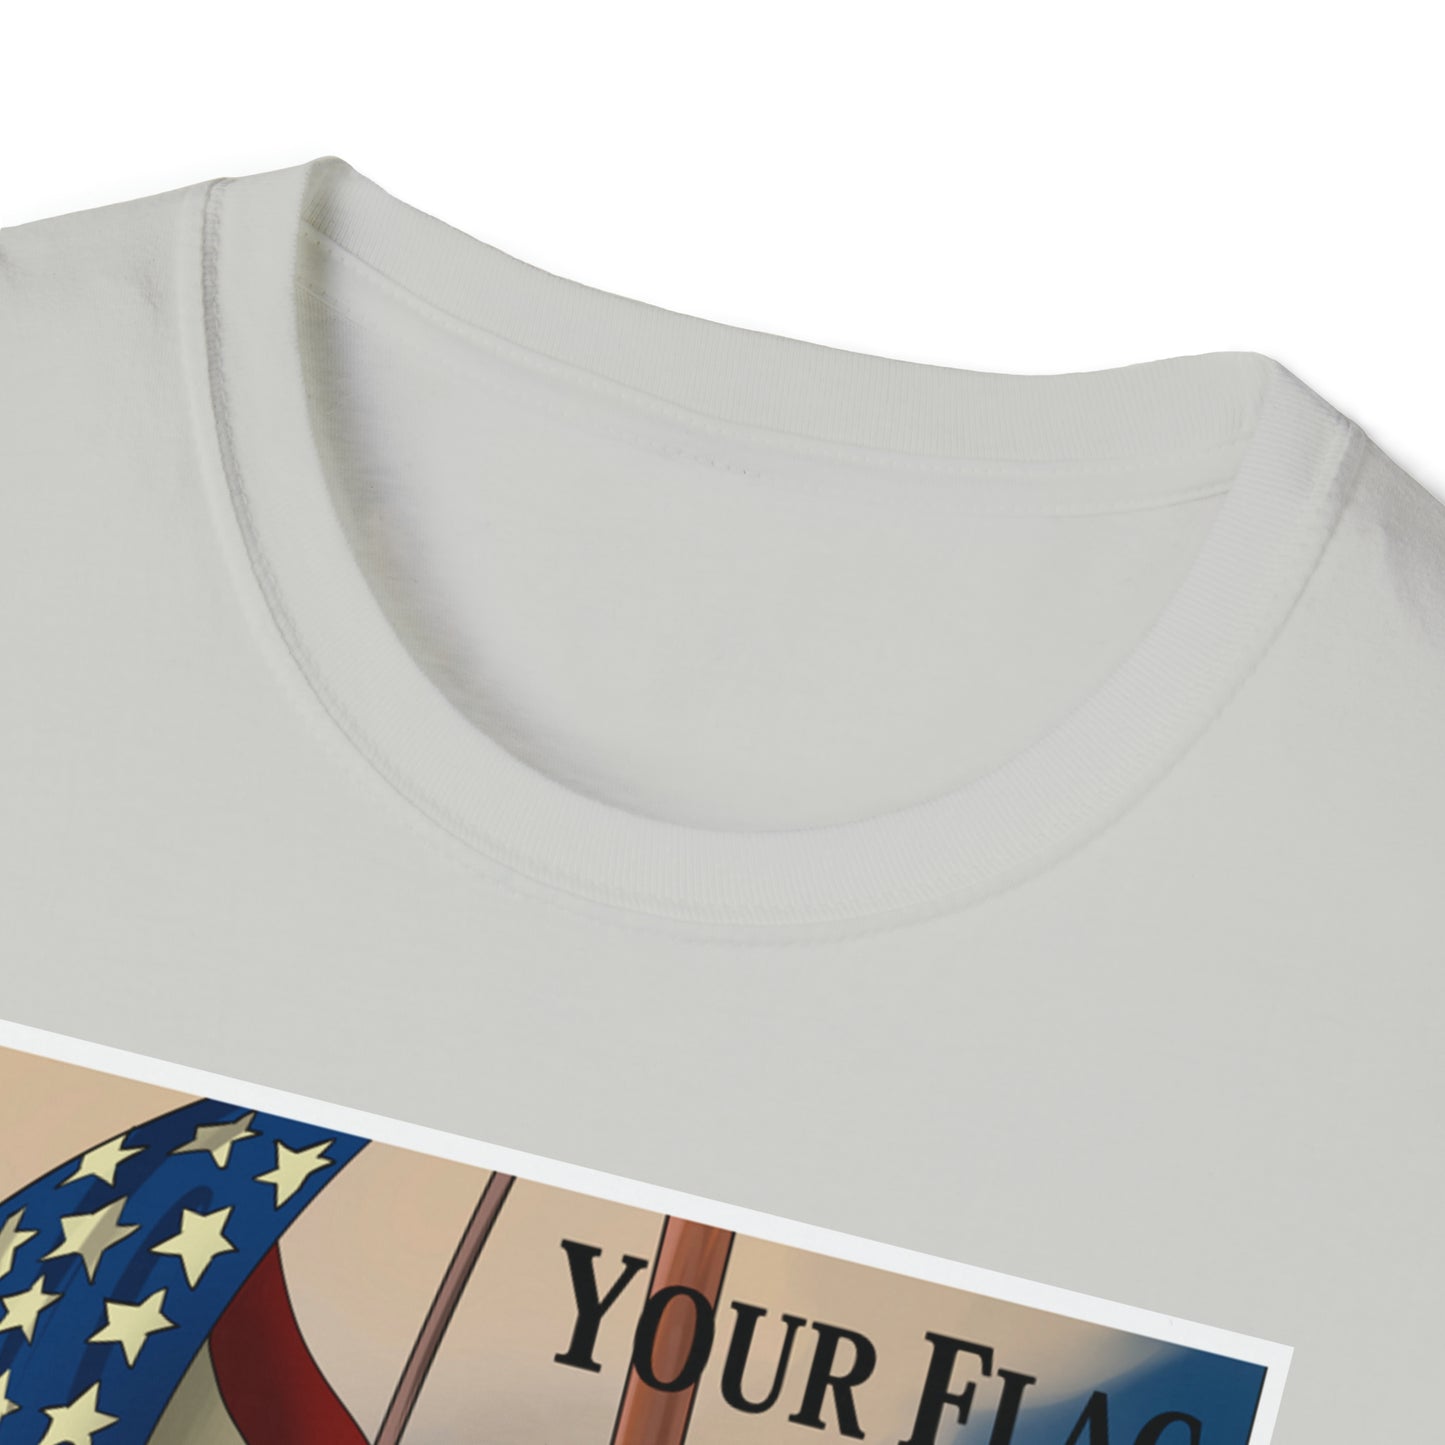 Your Flag and Mine Shirt